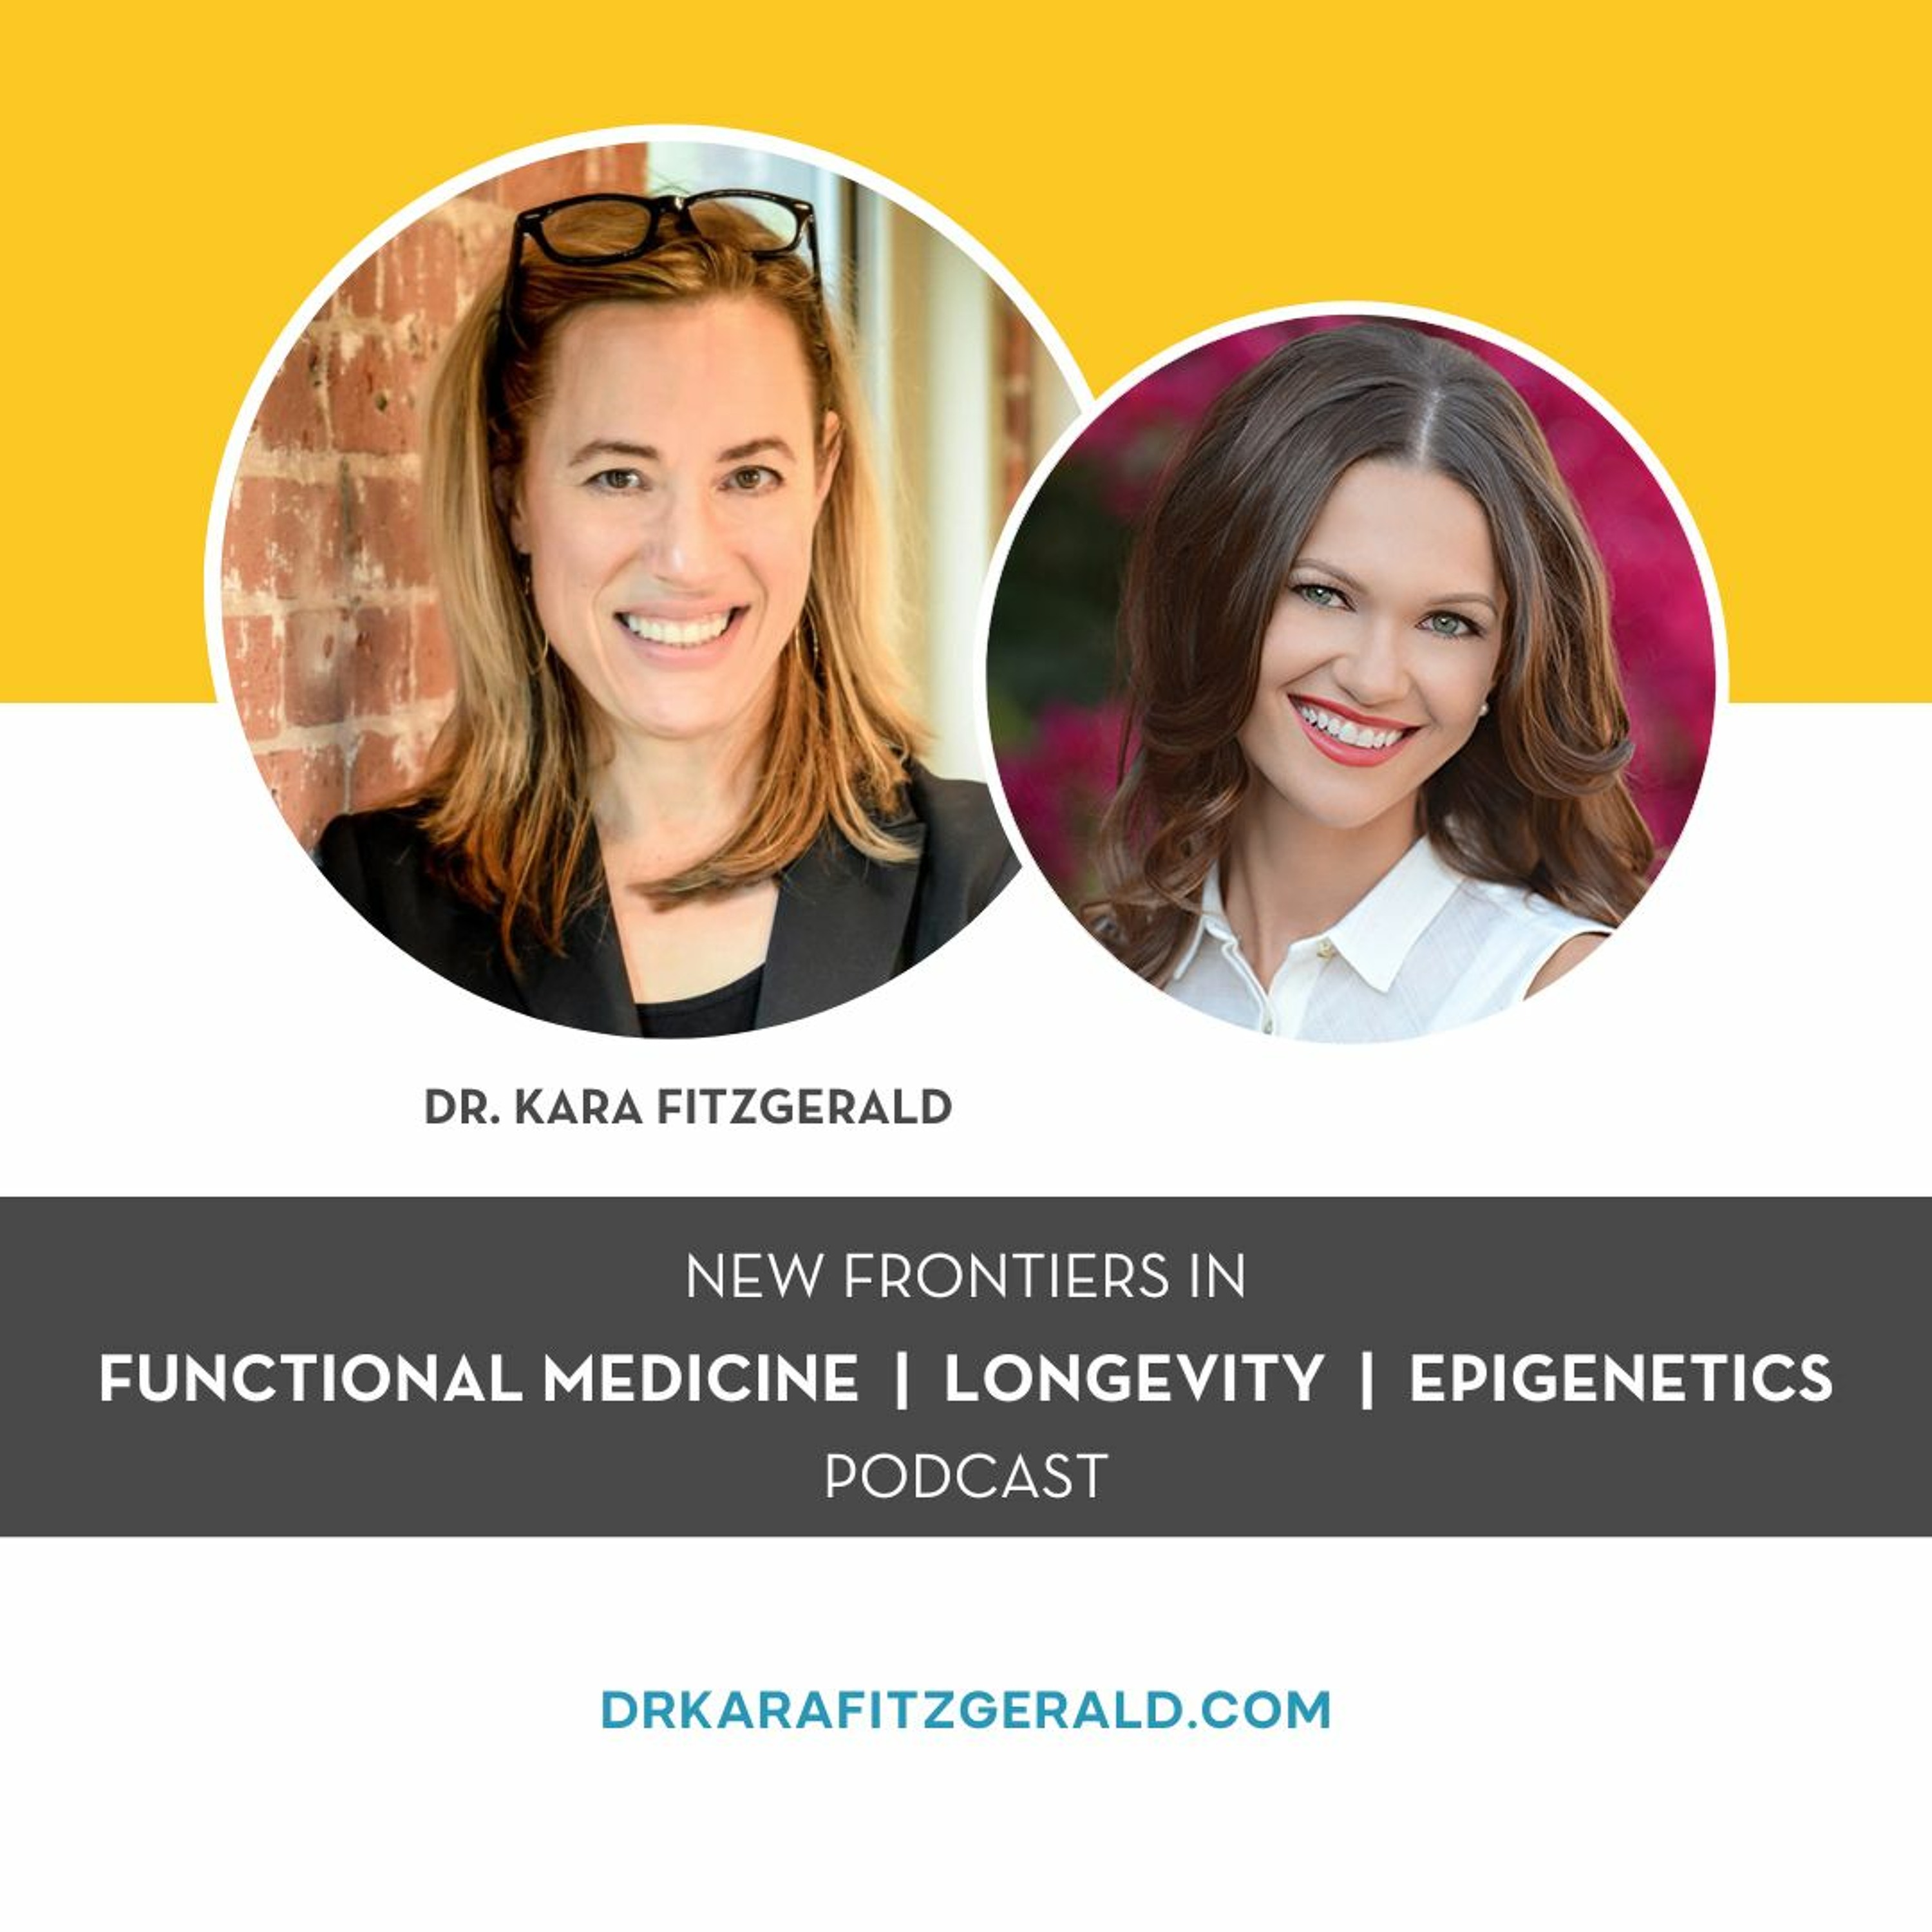 The Role of Adrenal Function in Thyroid Health and Longevity with Dr. Izabella Wentz